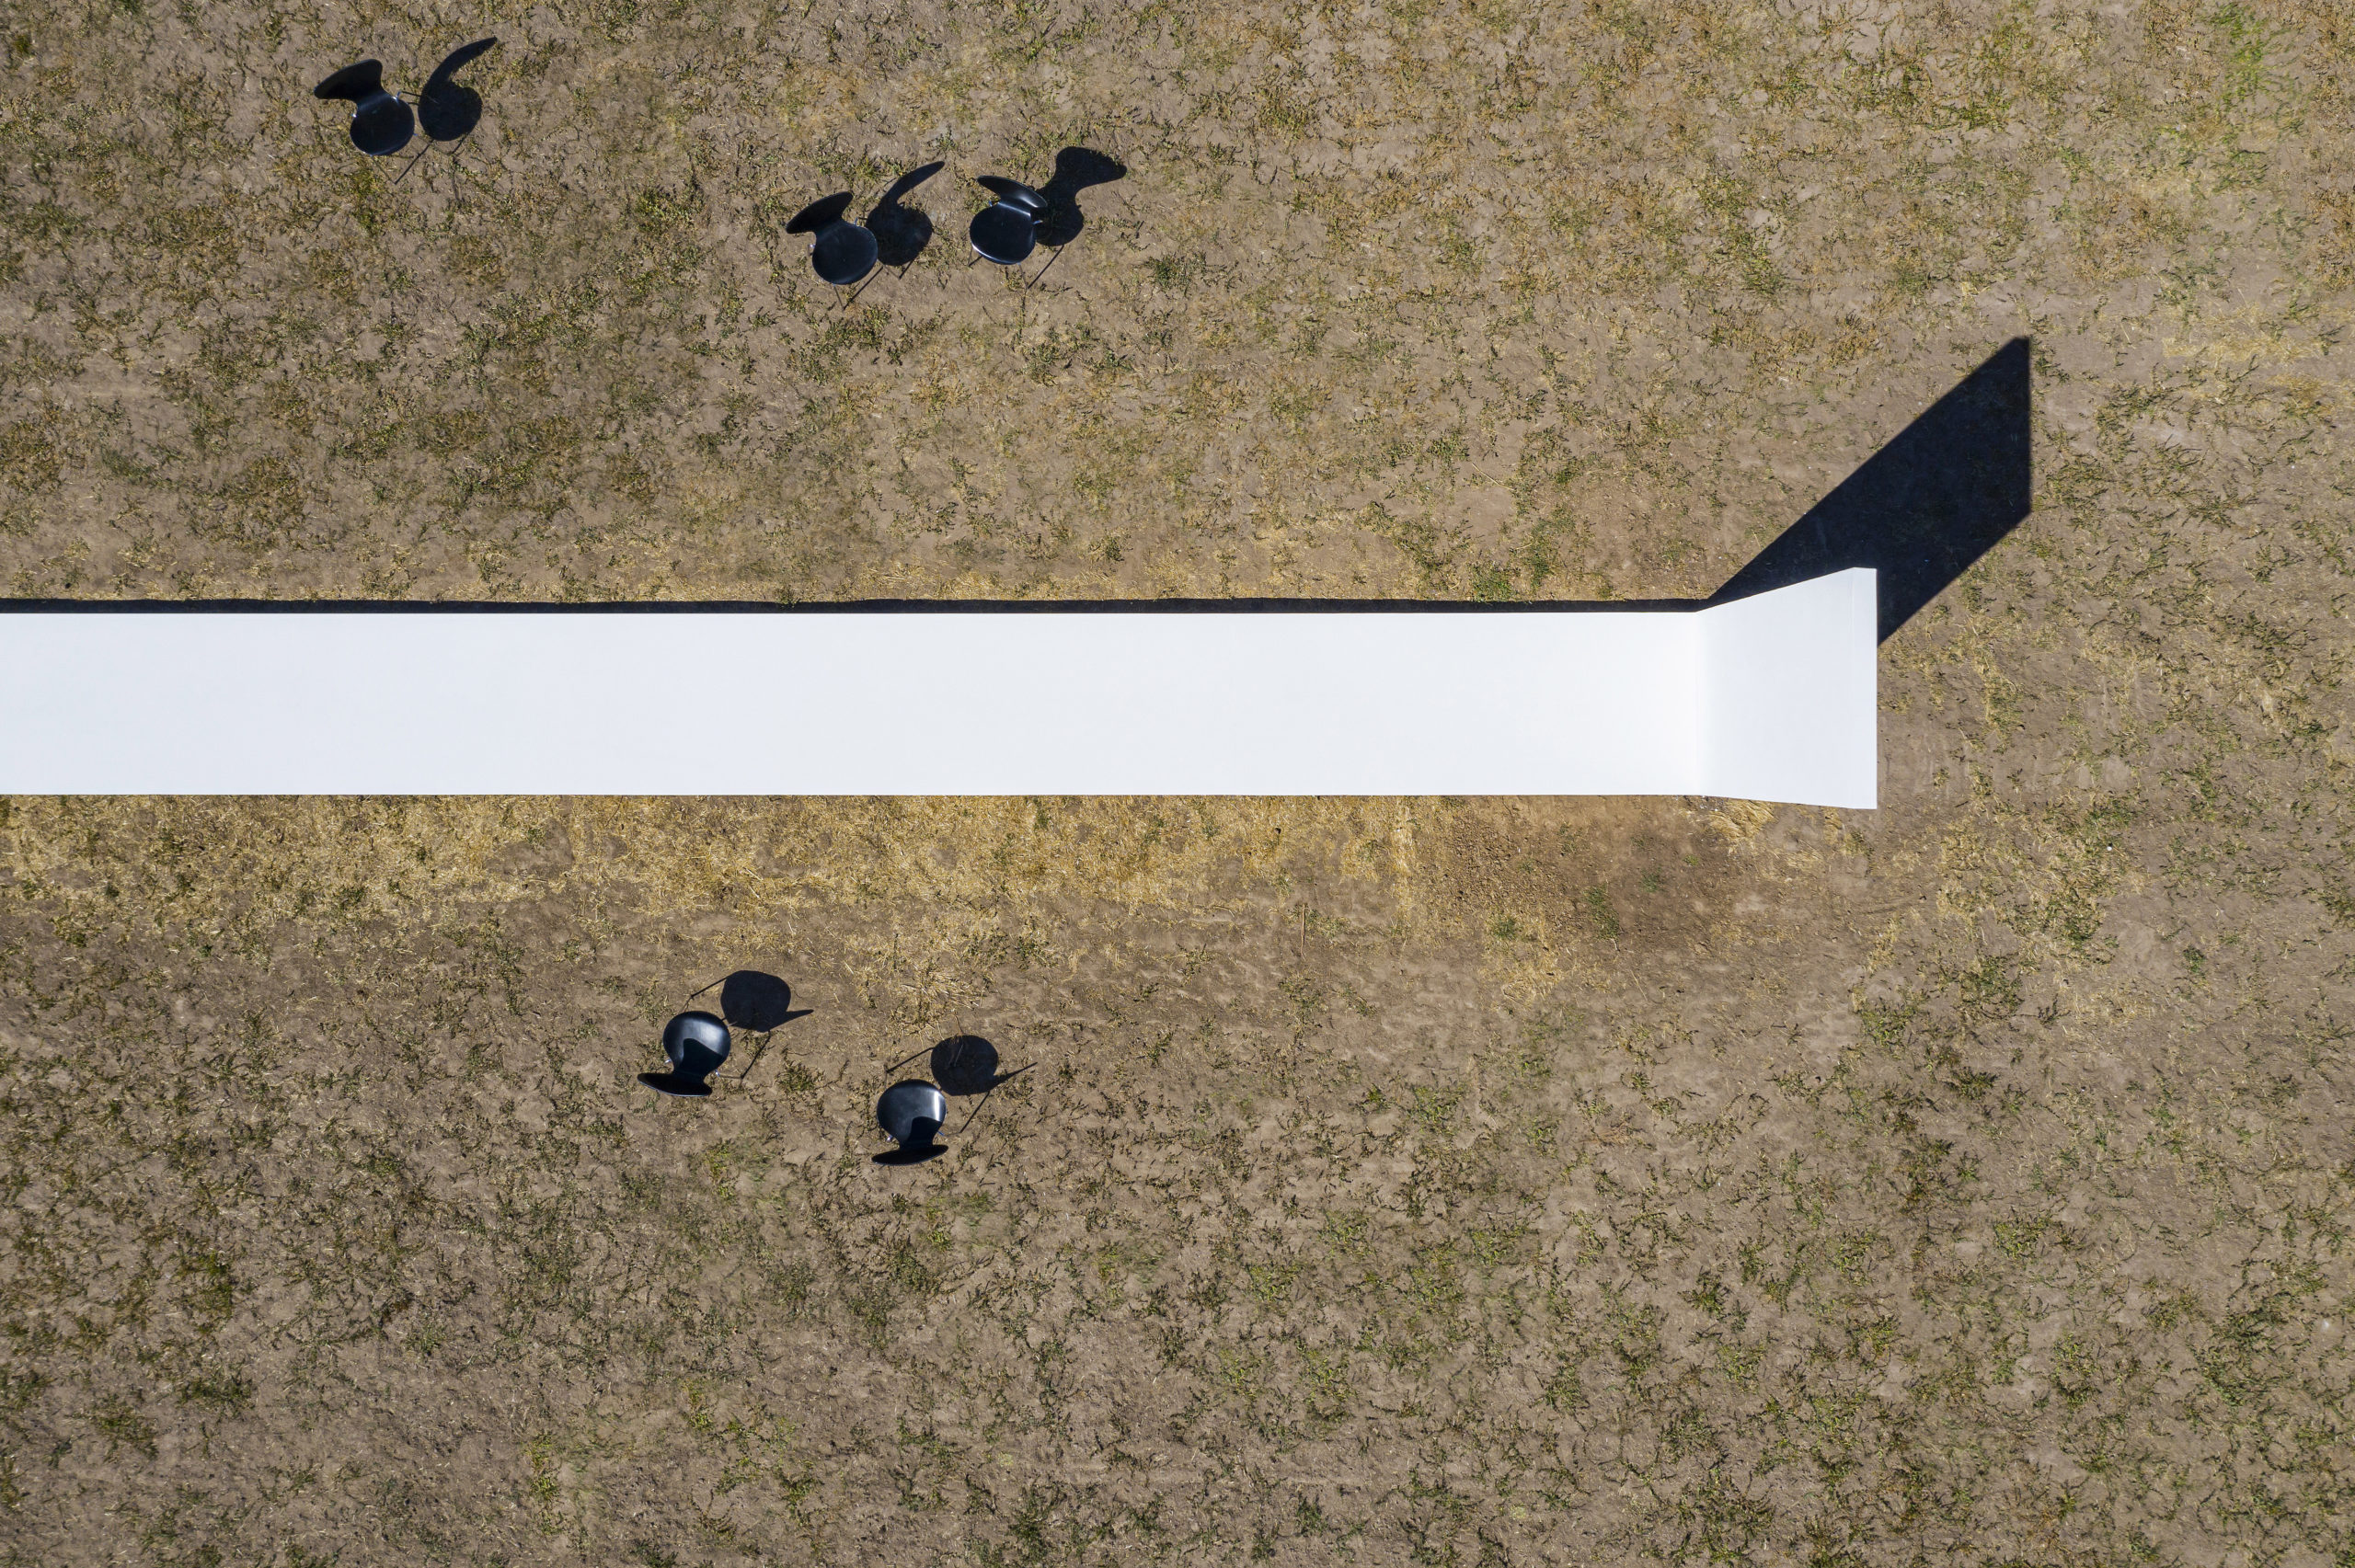 sleek stage takes the form of a smooth, continuous line, which floats on pier footings in a rural area of California